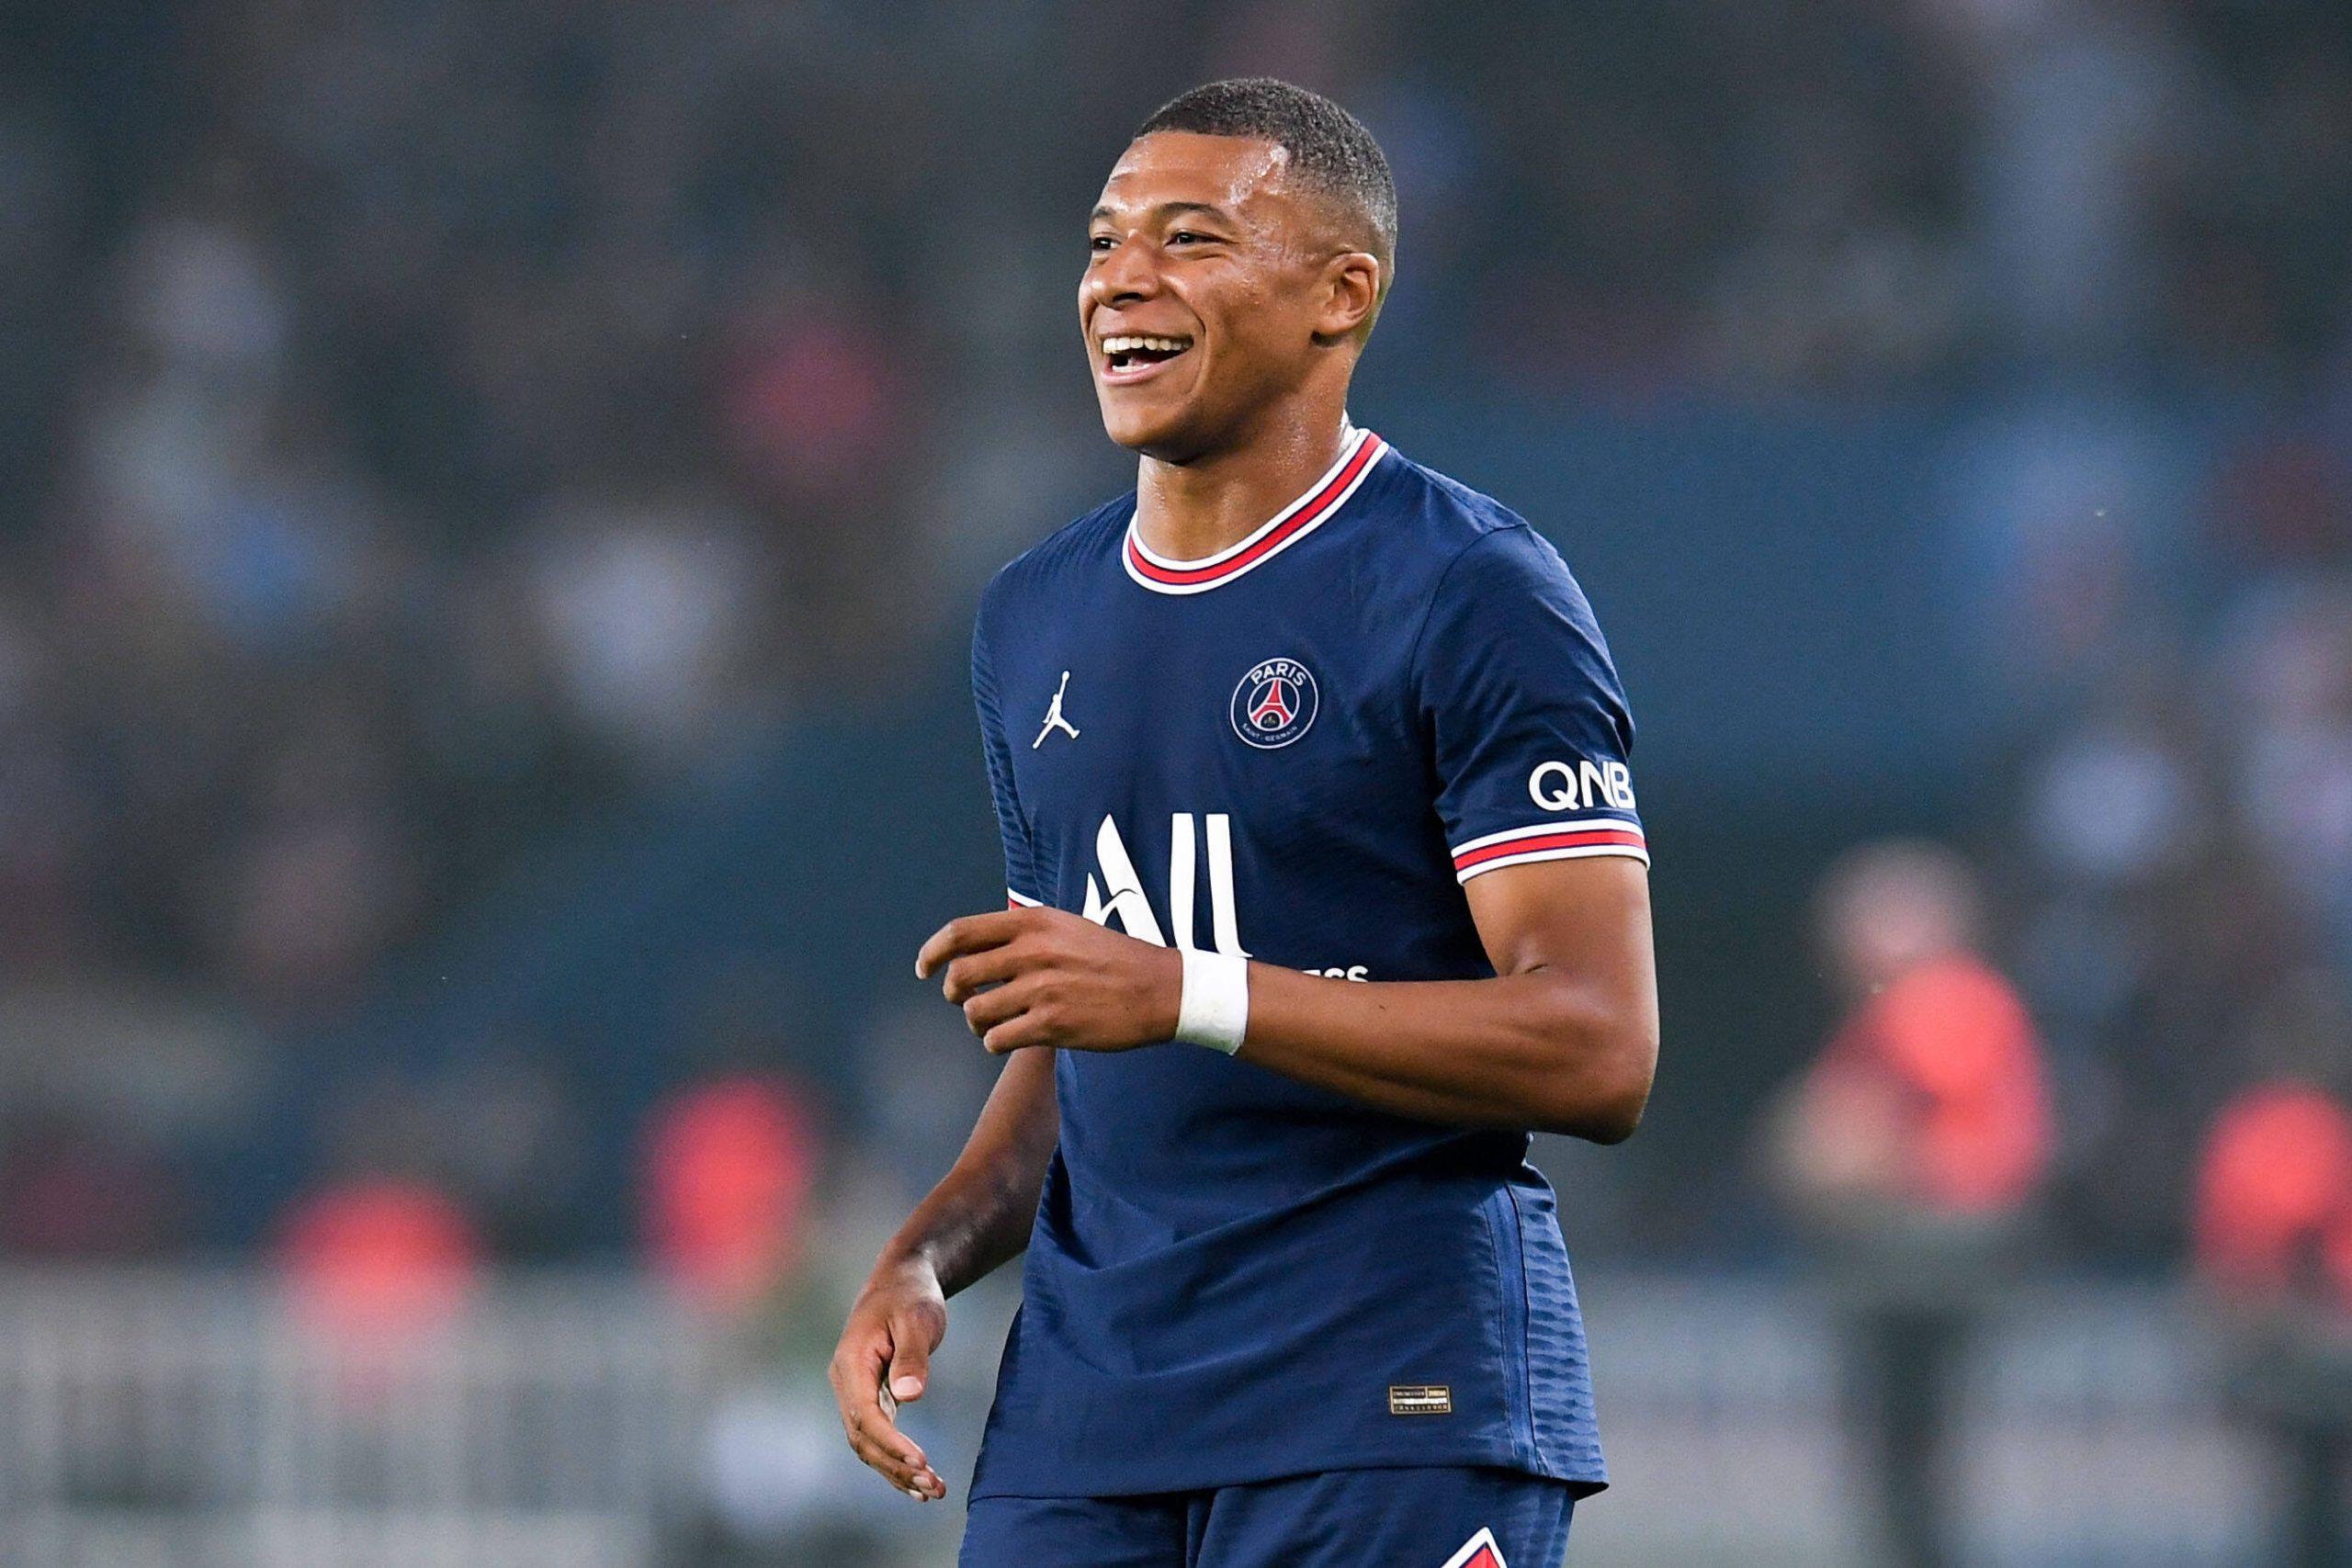 Player Ratings | PSG 4-2 Strasbourg, Kylian Mbappé's class helps Paris  overcome Strasbourg fightback | Get French Football News